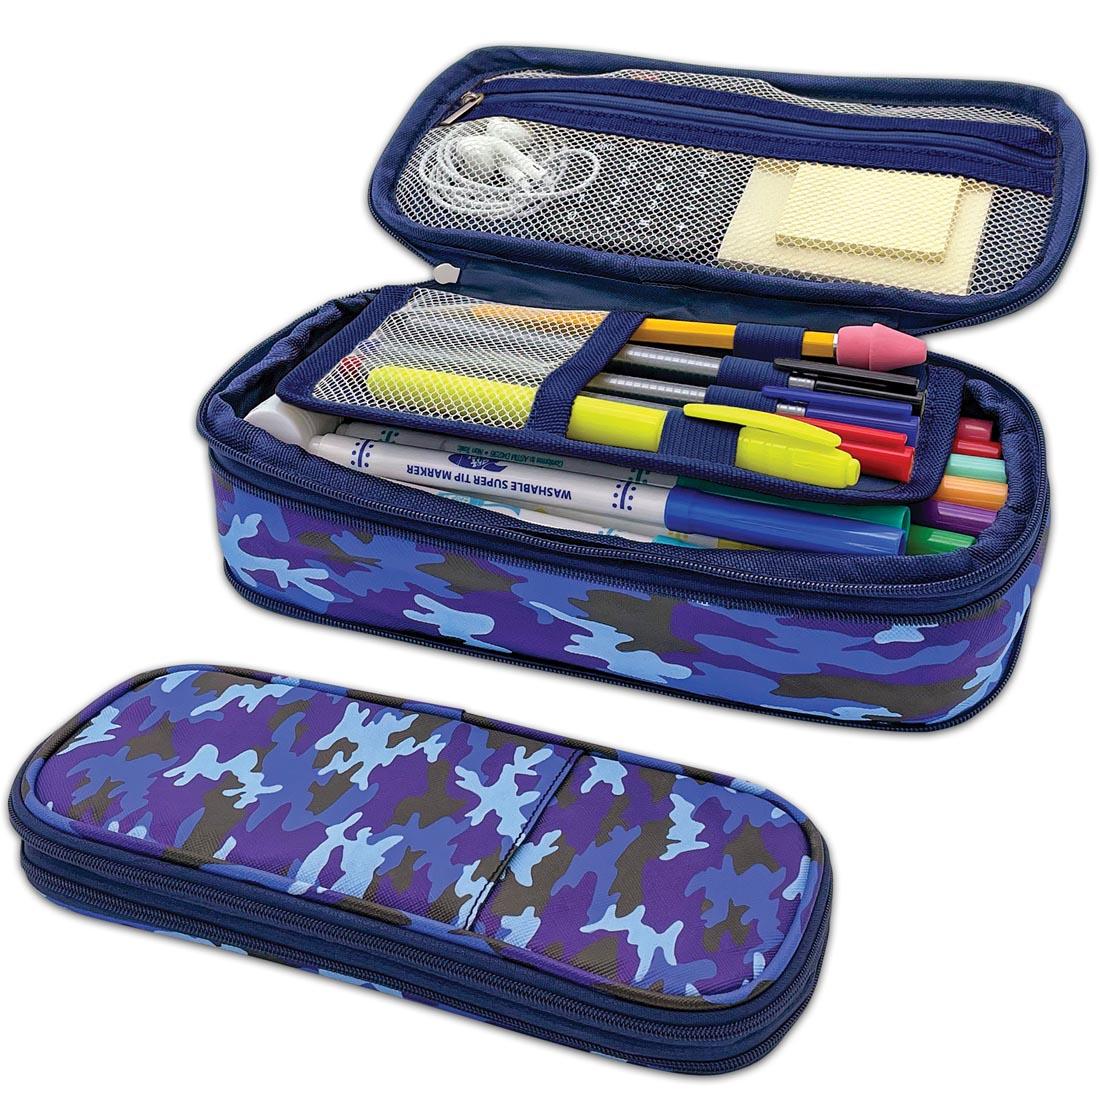 Blue Camo Pencil Case shown both closed and open with suggested contents inside